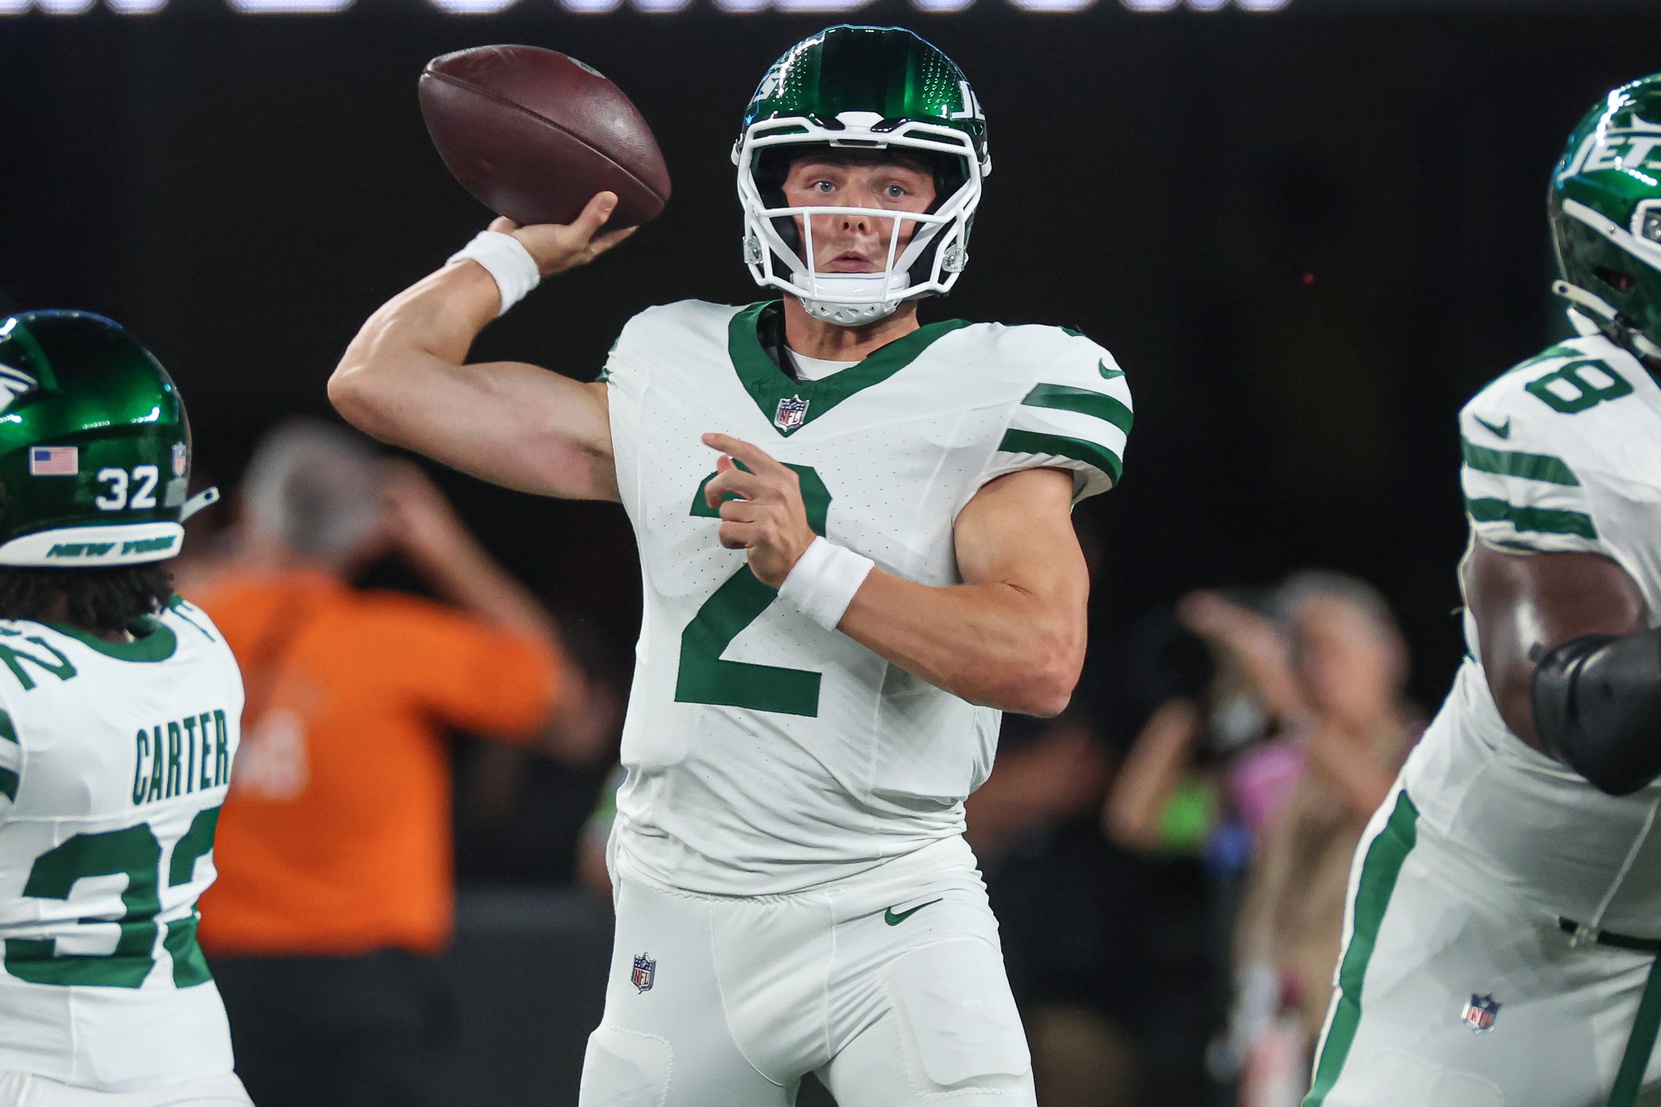 Jets quarterback Zach Wilson outplayed Chiefs quarterback Patrick Mahomes on Monday night in Week 4.